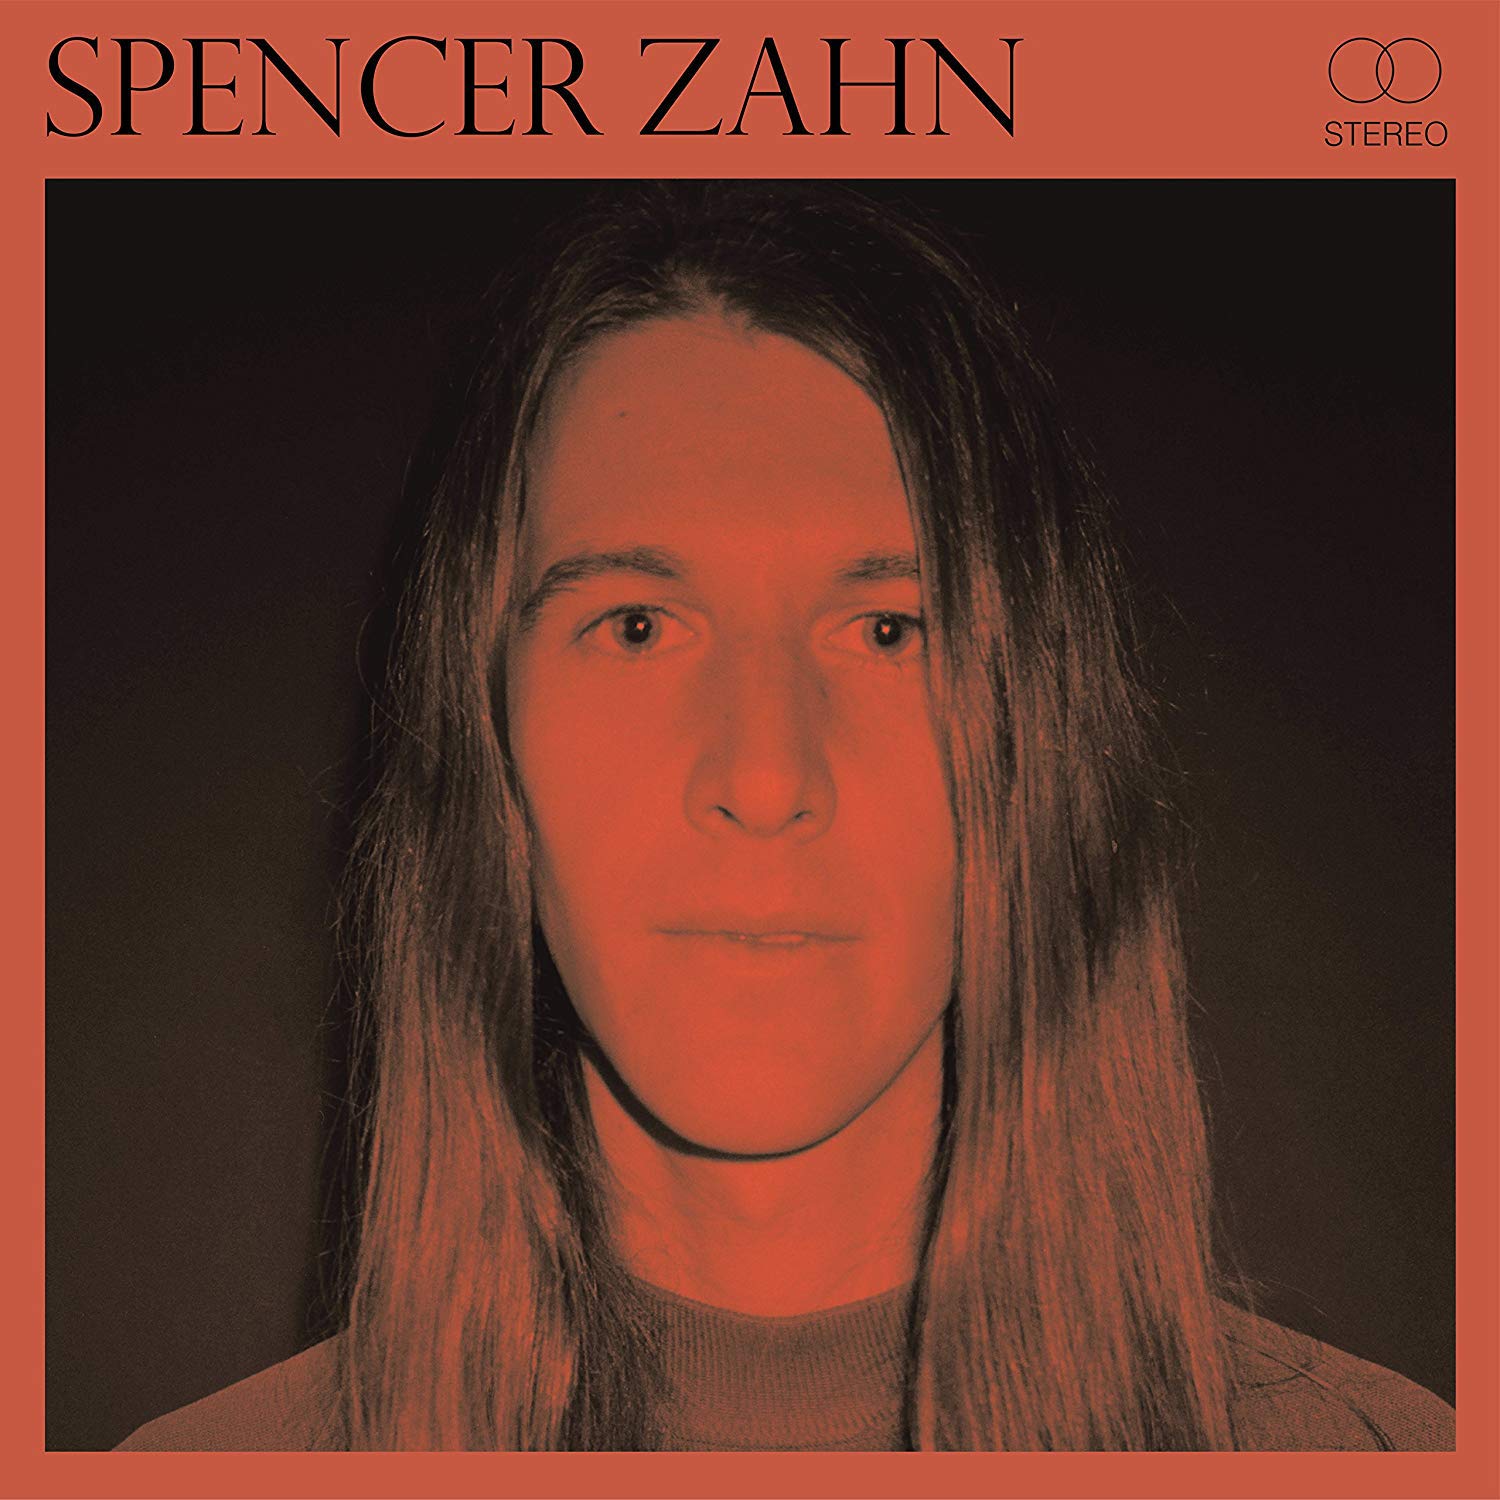 Spencer Zahn: People of the Dawn